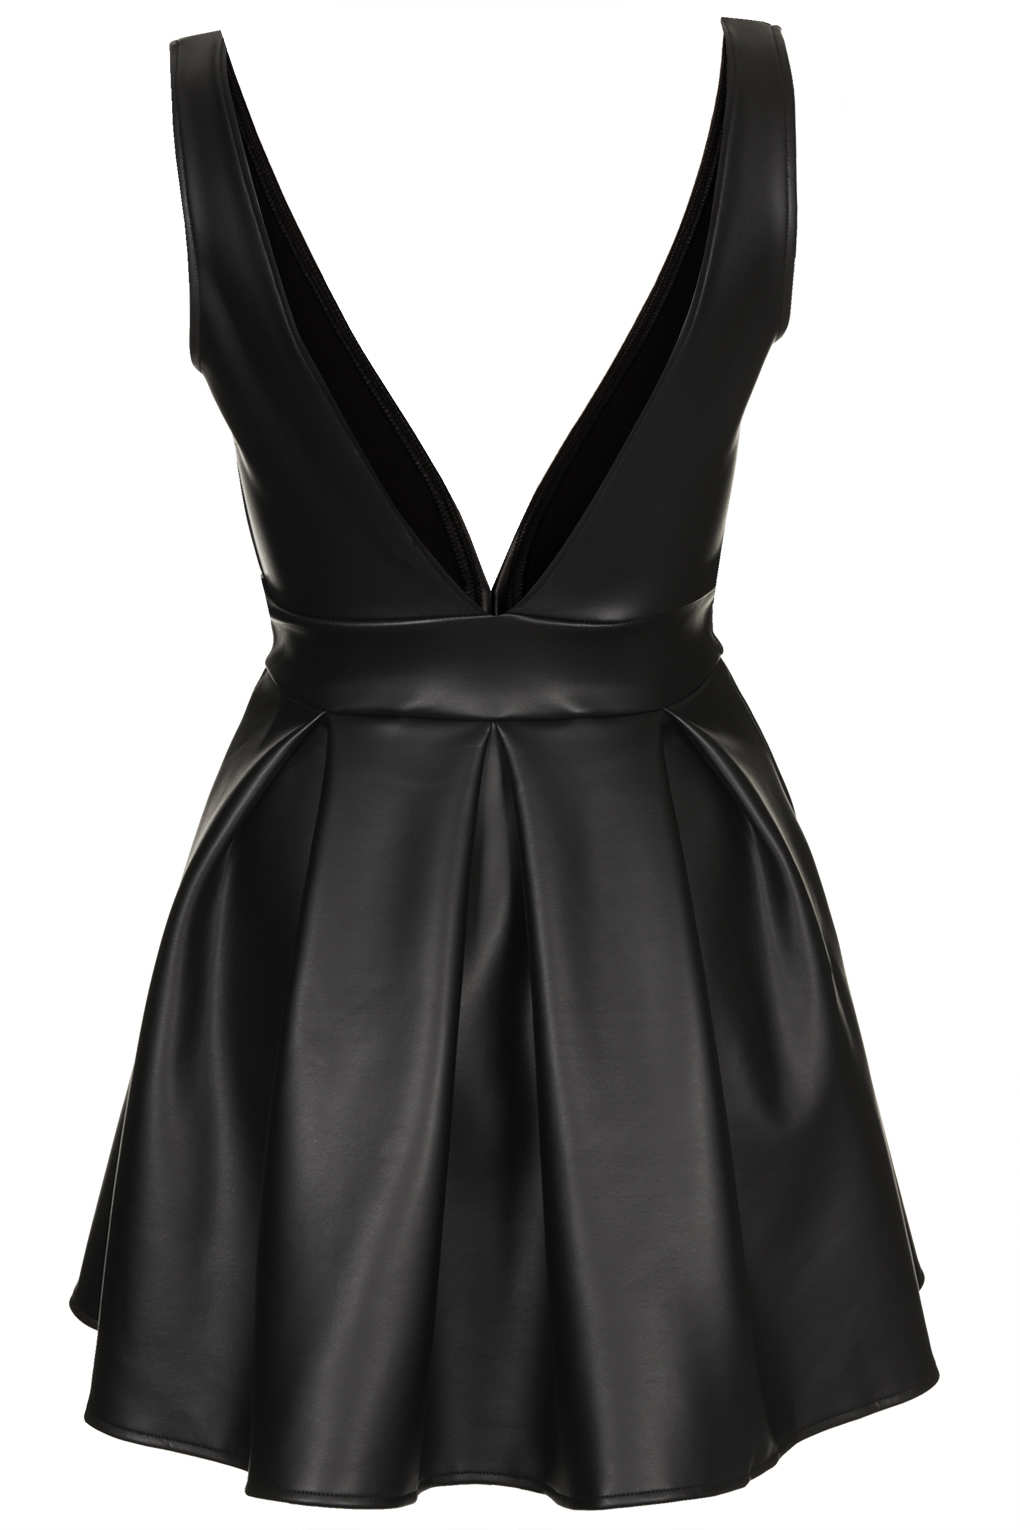 Lyst - Topshop Deep V Pu Skater Dress By Oh My Love in Black